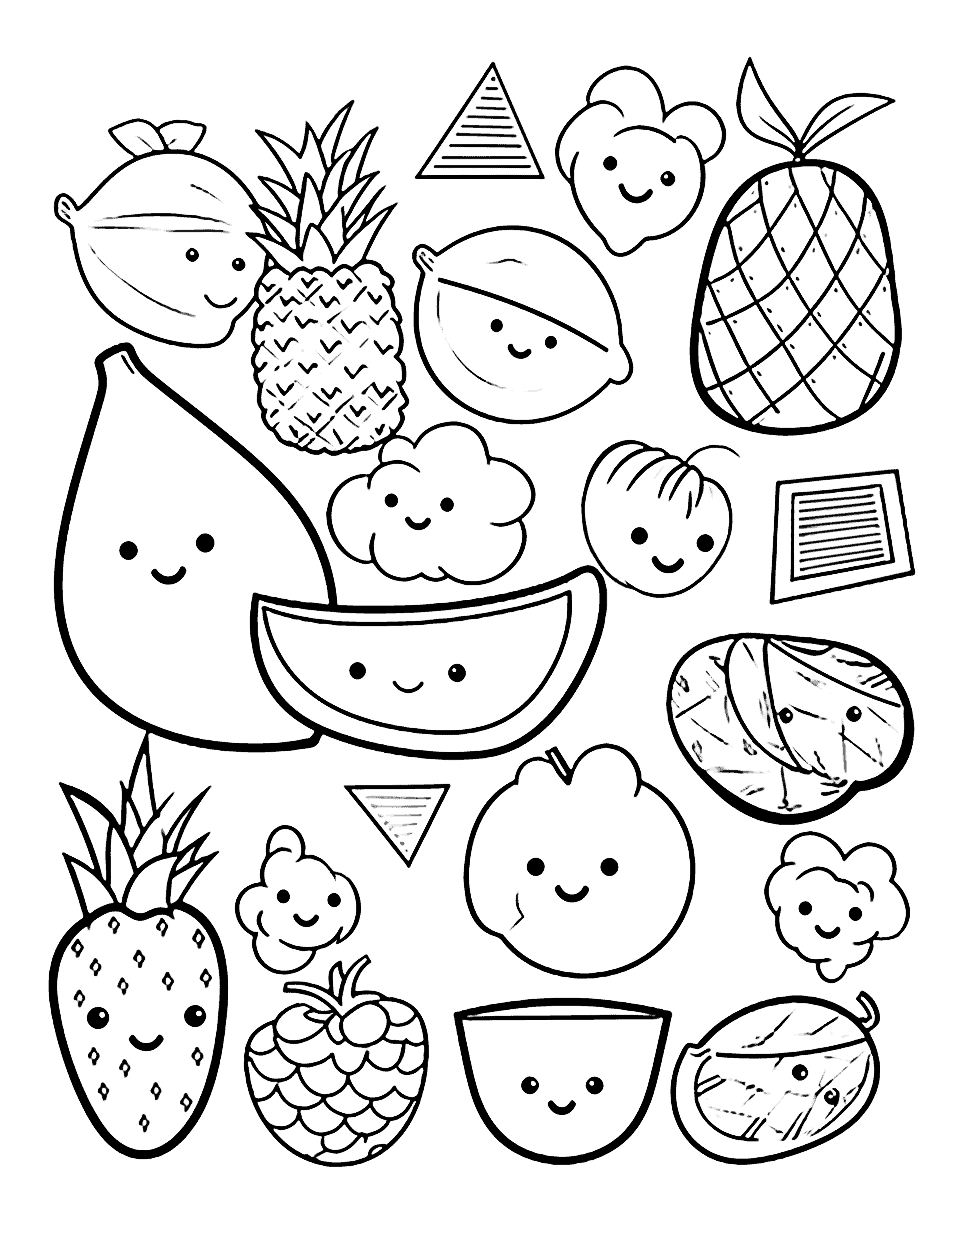 Kawaii Summer Fruits Coloring Page - A collection of kawaii style summer fruits like watermelons, pineapples, and strawberries.